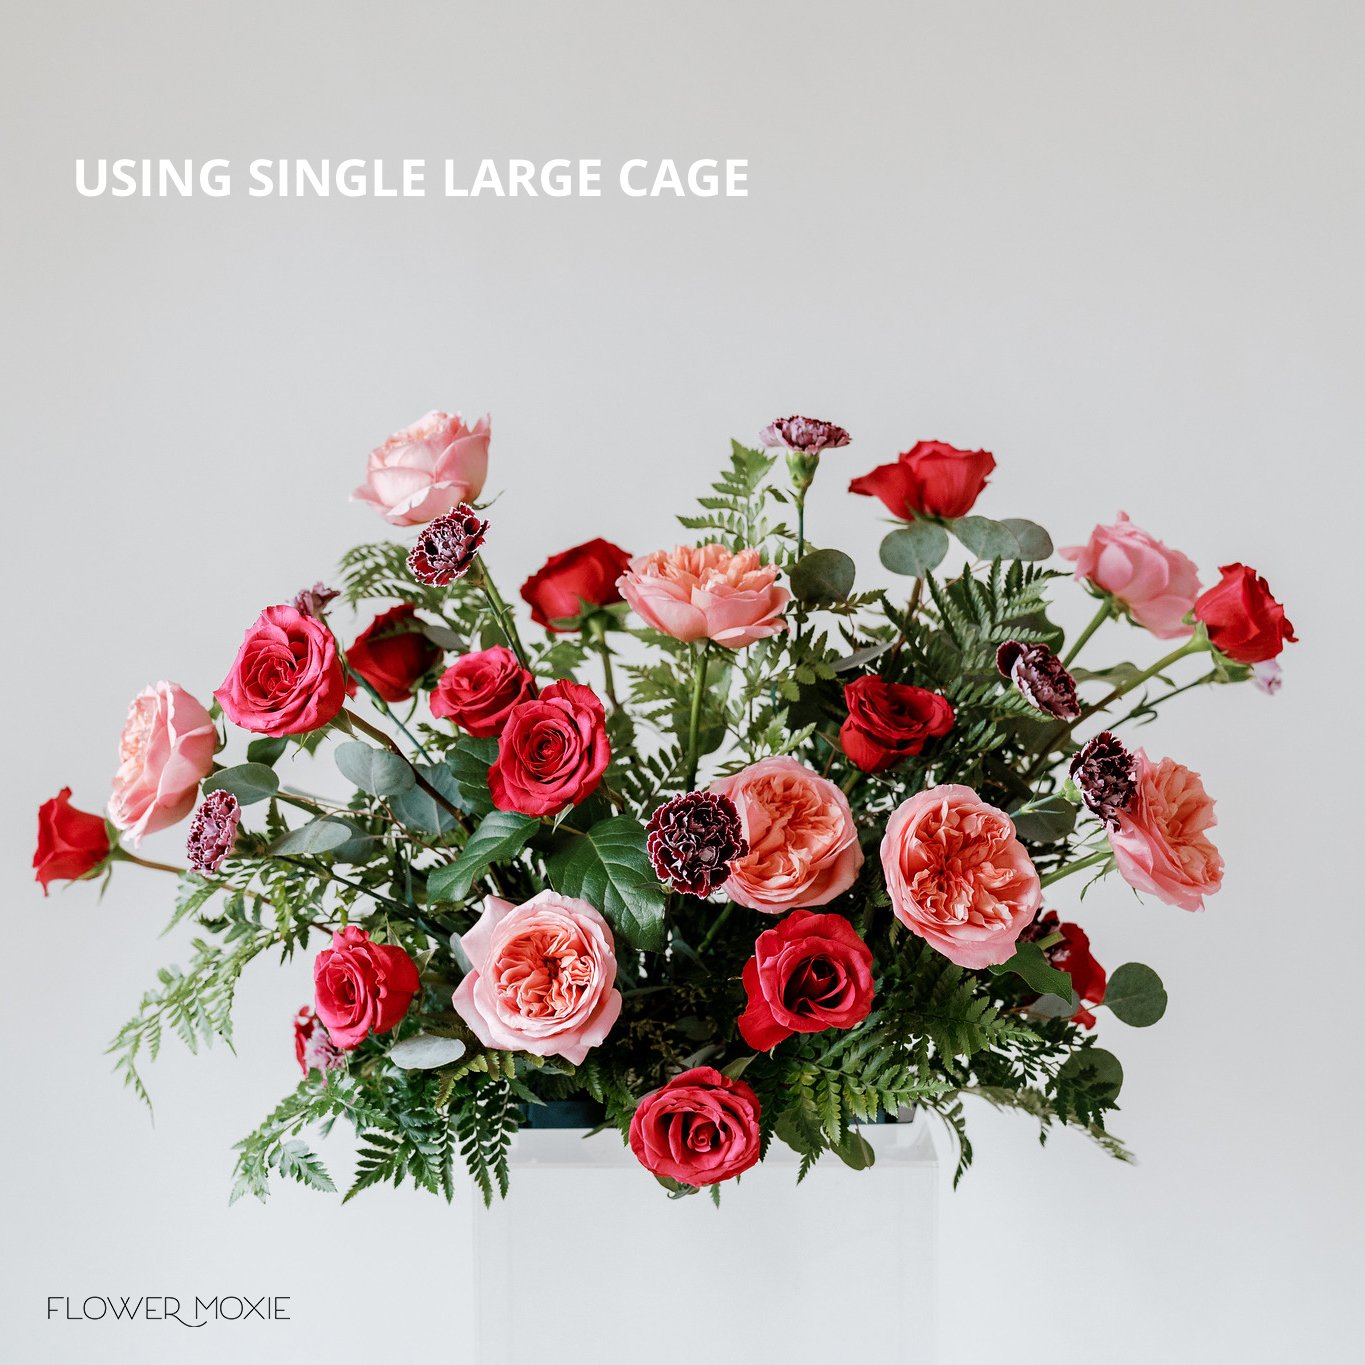 Jumbo Cage Extra-large cage filled with Oasis Standard Floral Foam.